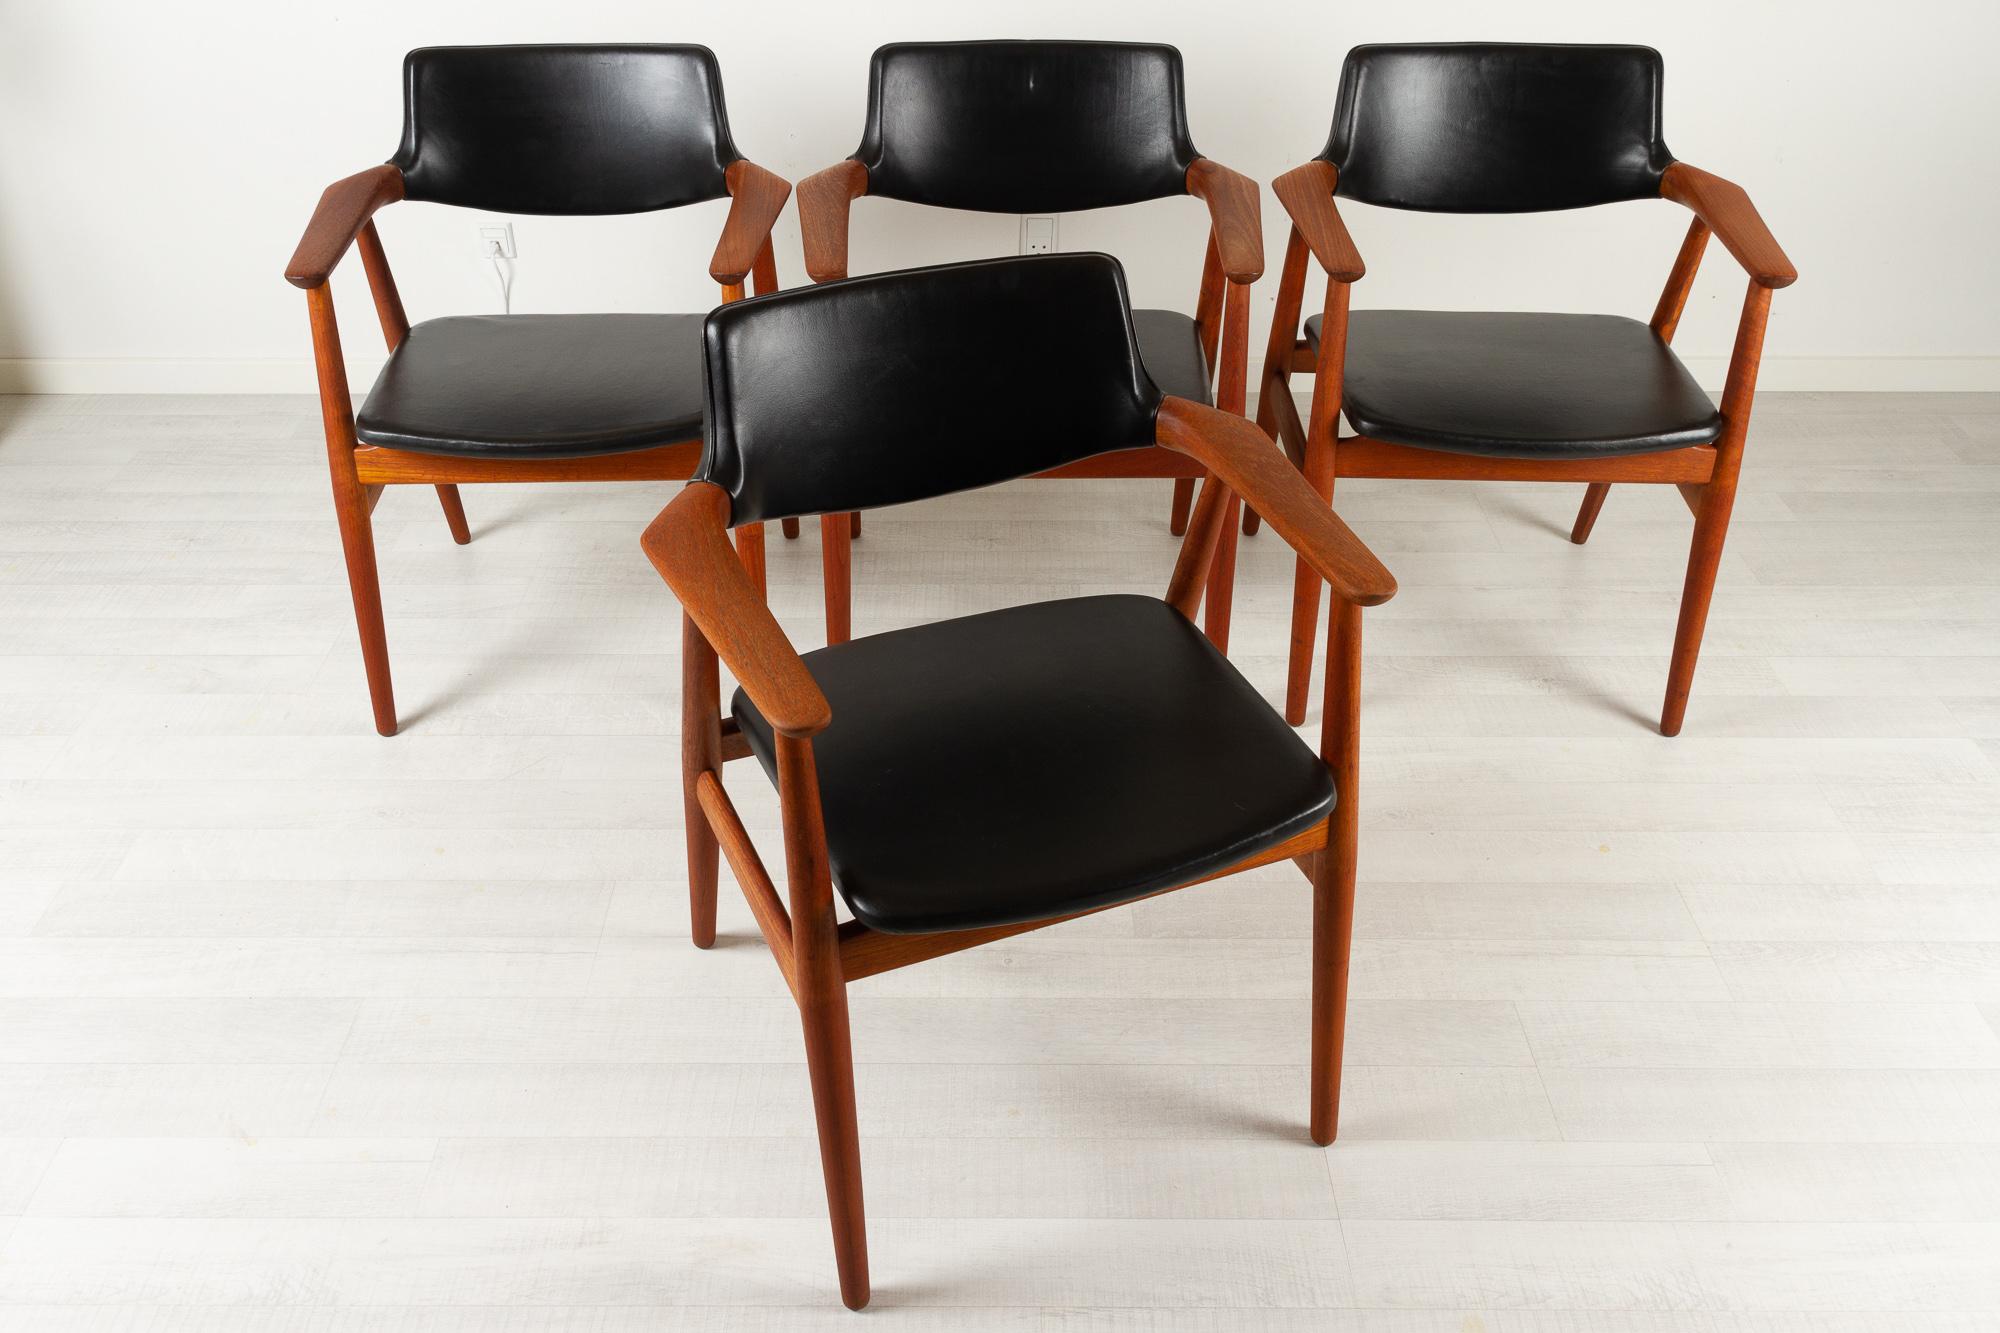 Vintage Danish Teak Armchairs GM11 by Svend Aage Eriksen 1960s Set of 4 In Good Condition For Sale In Asaa, DK